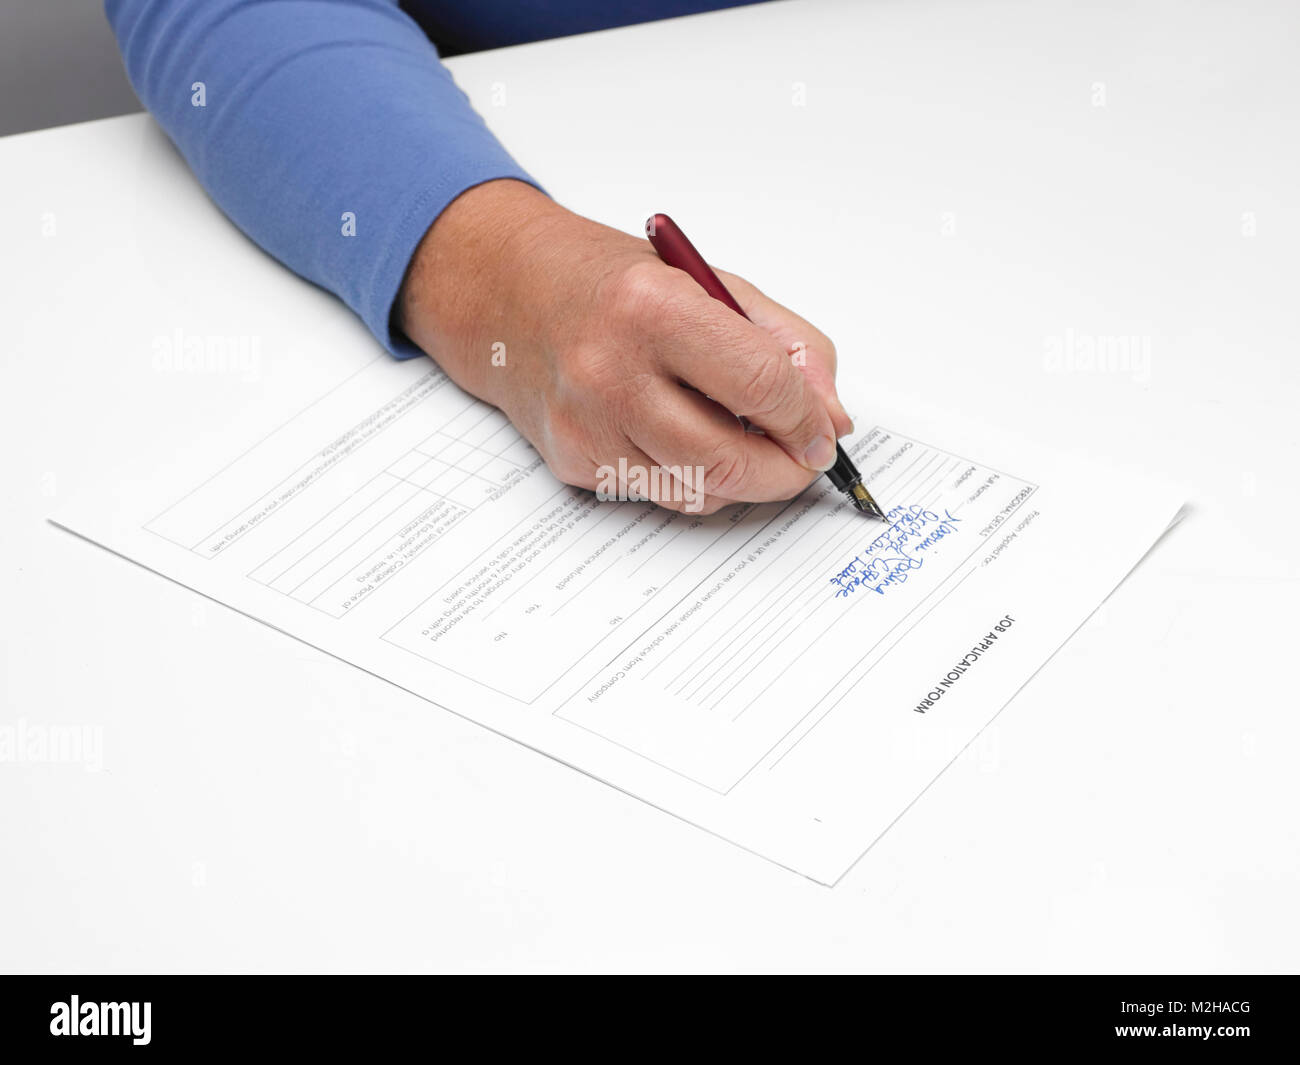 a female hand filling in a job application form with pen Stock Photo